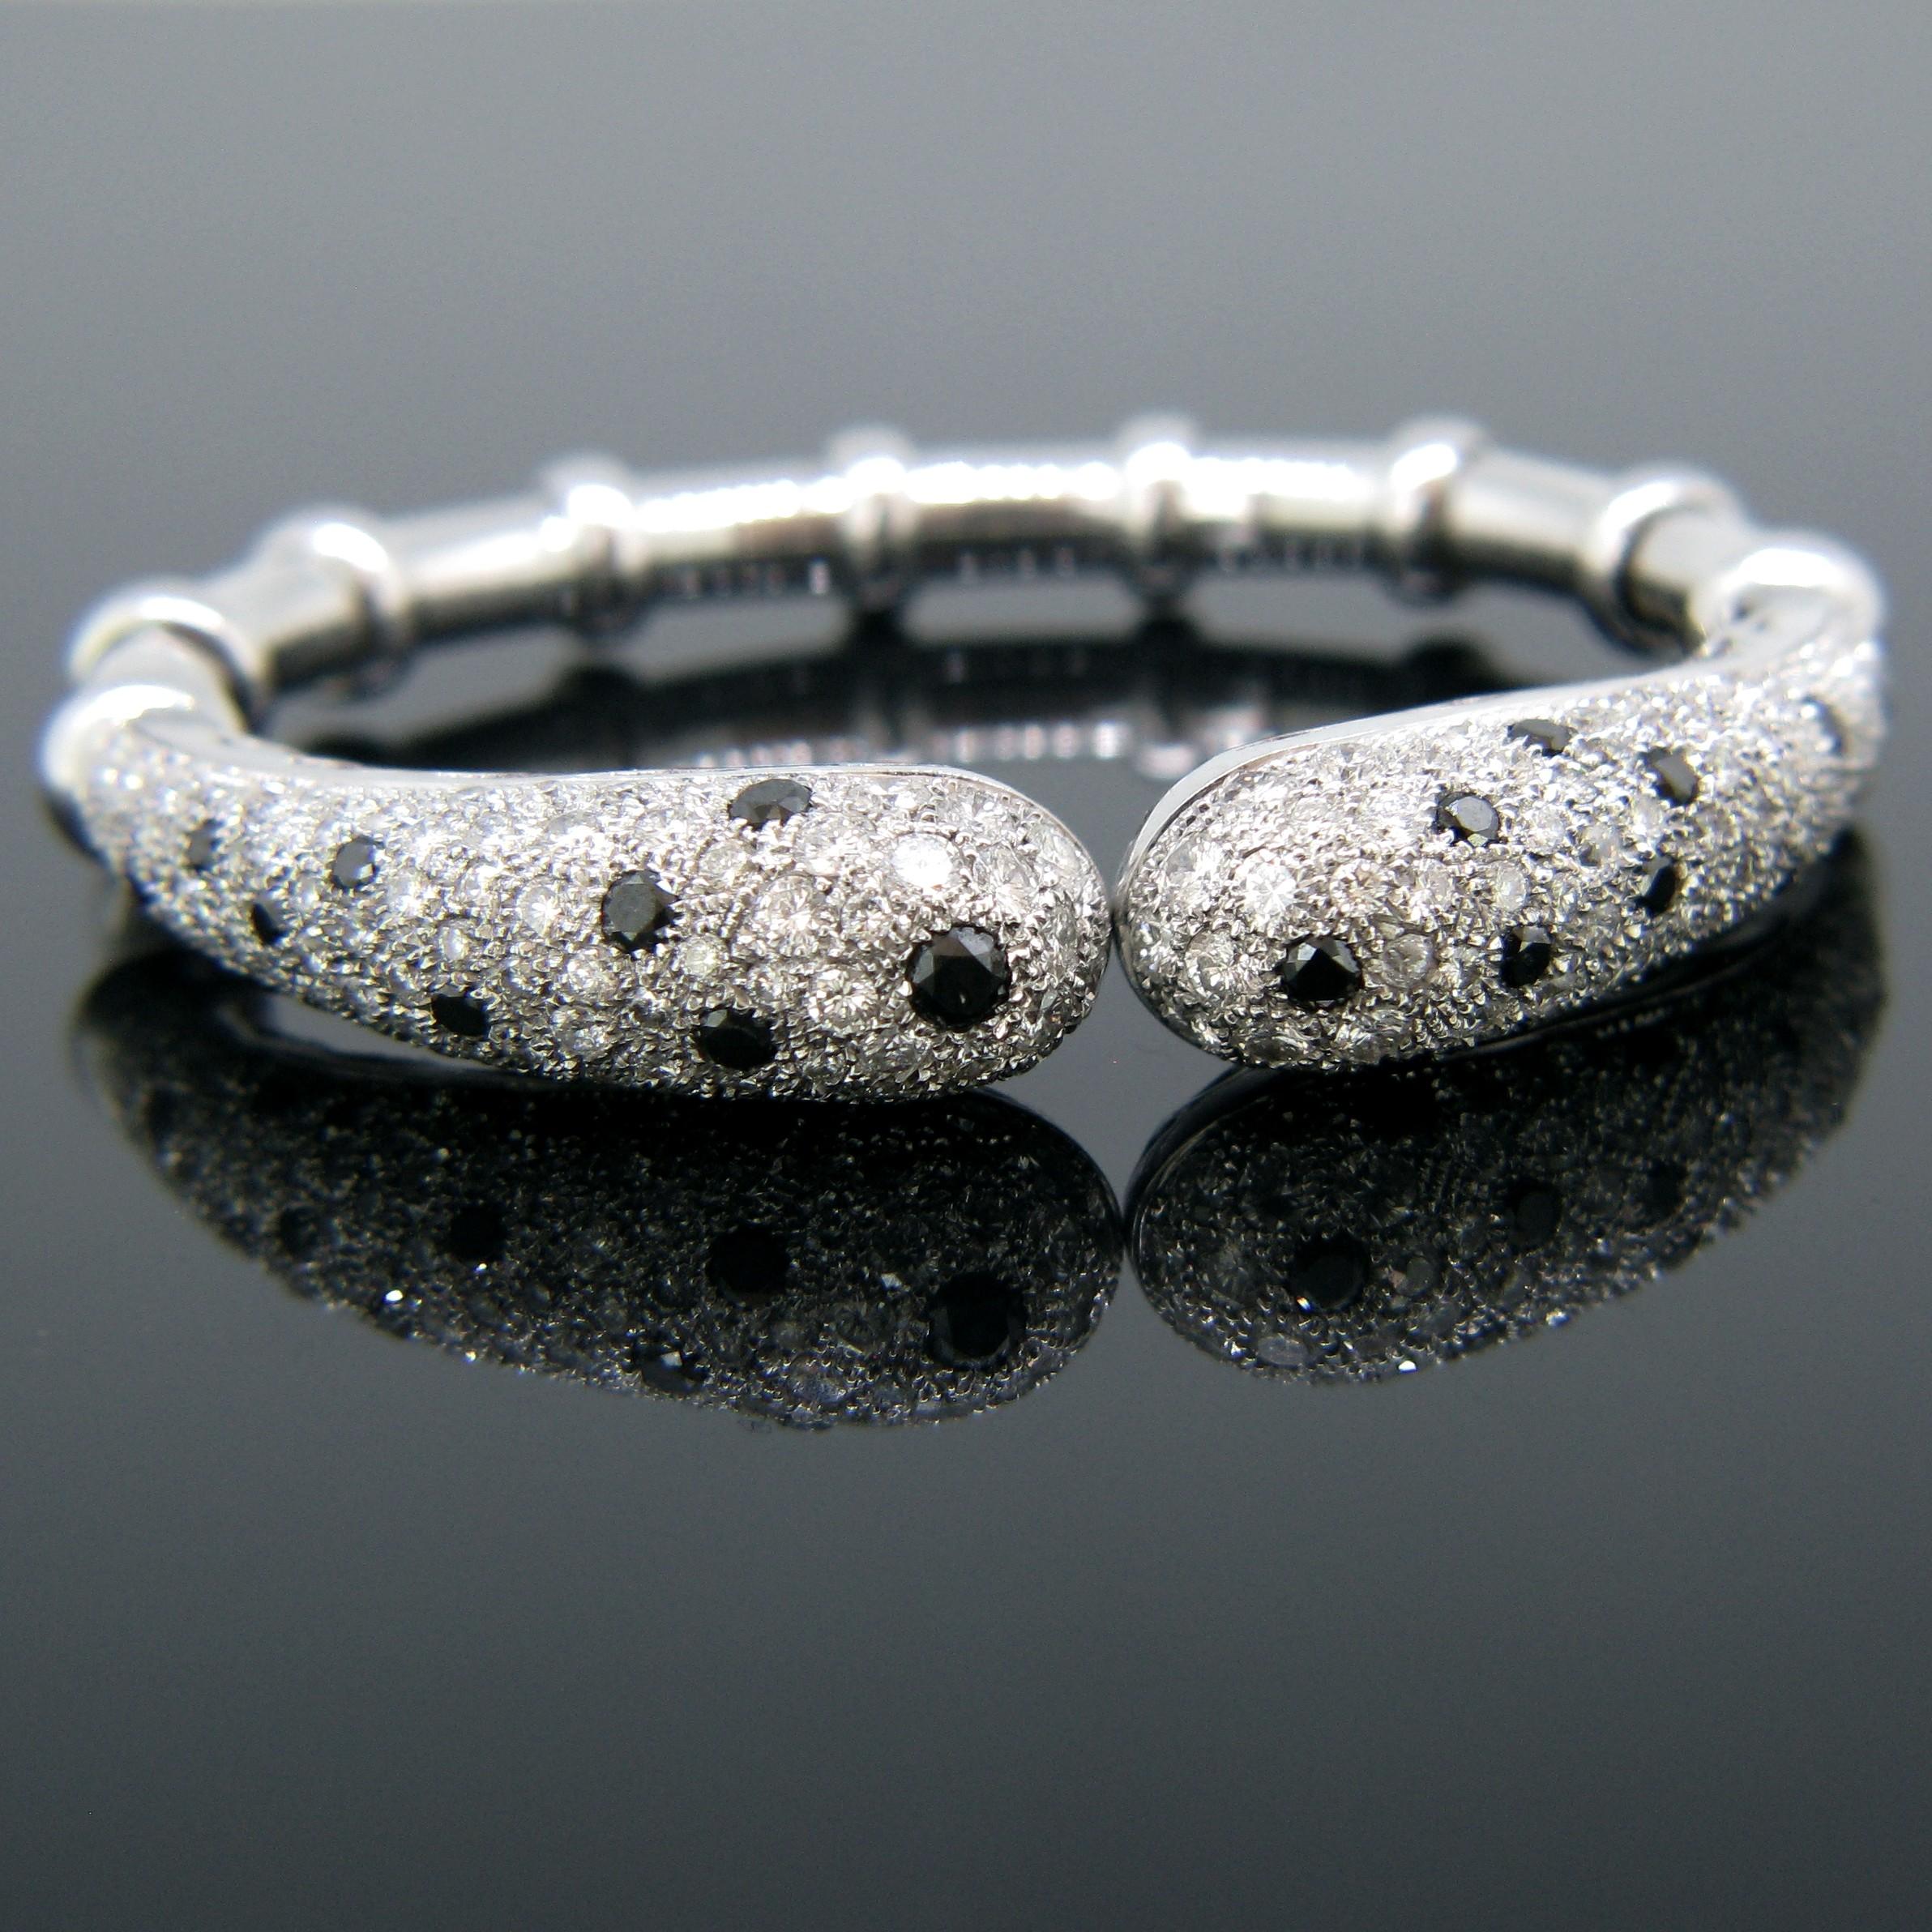 This beautiful bangle is fully made in 18kt white gold. It is set with 24 black diamonds and 190 White Diamonds. The total diamond carat weight is around 4.30ct. It is in excellent condition and very comfortable to wear. It is a great addition to